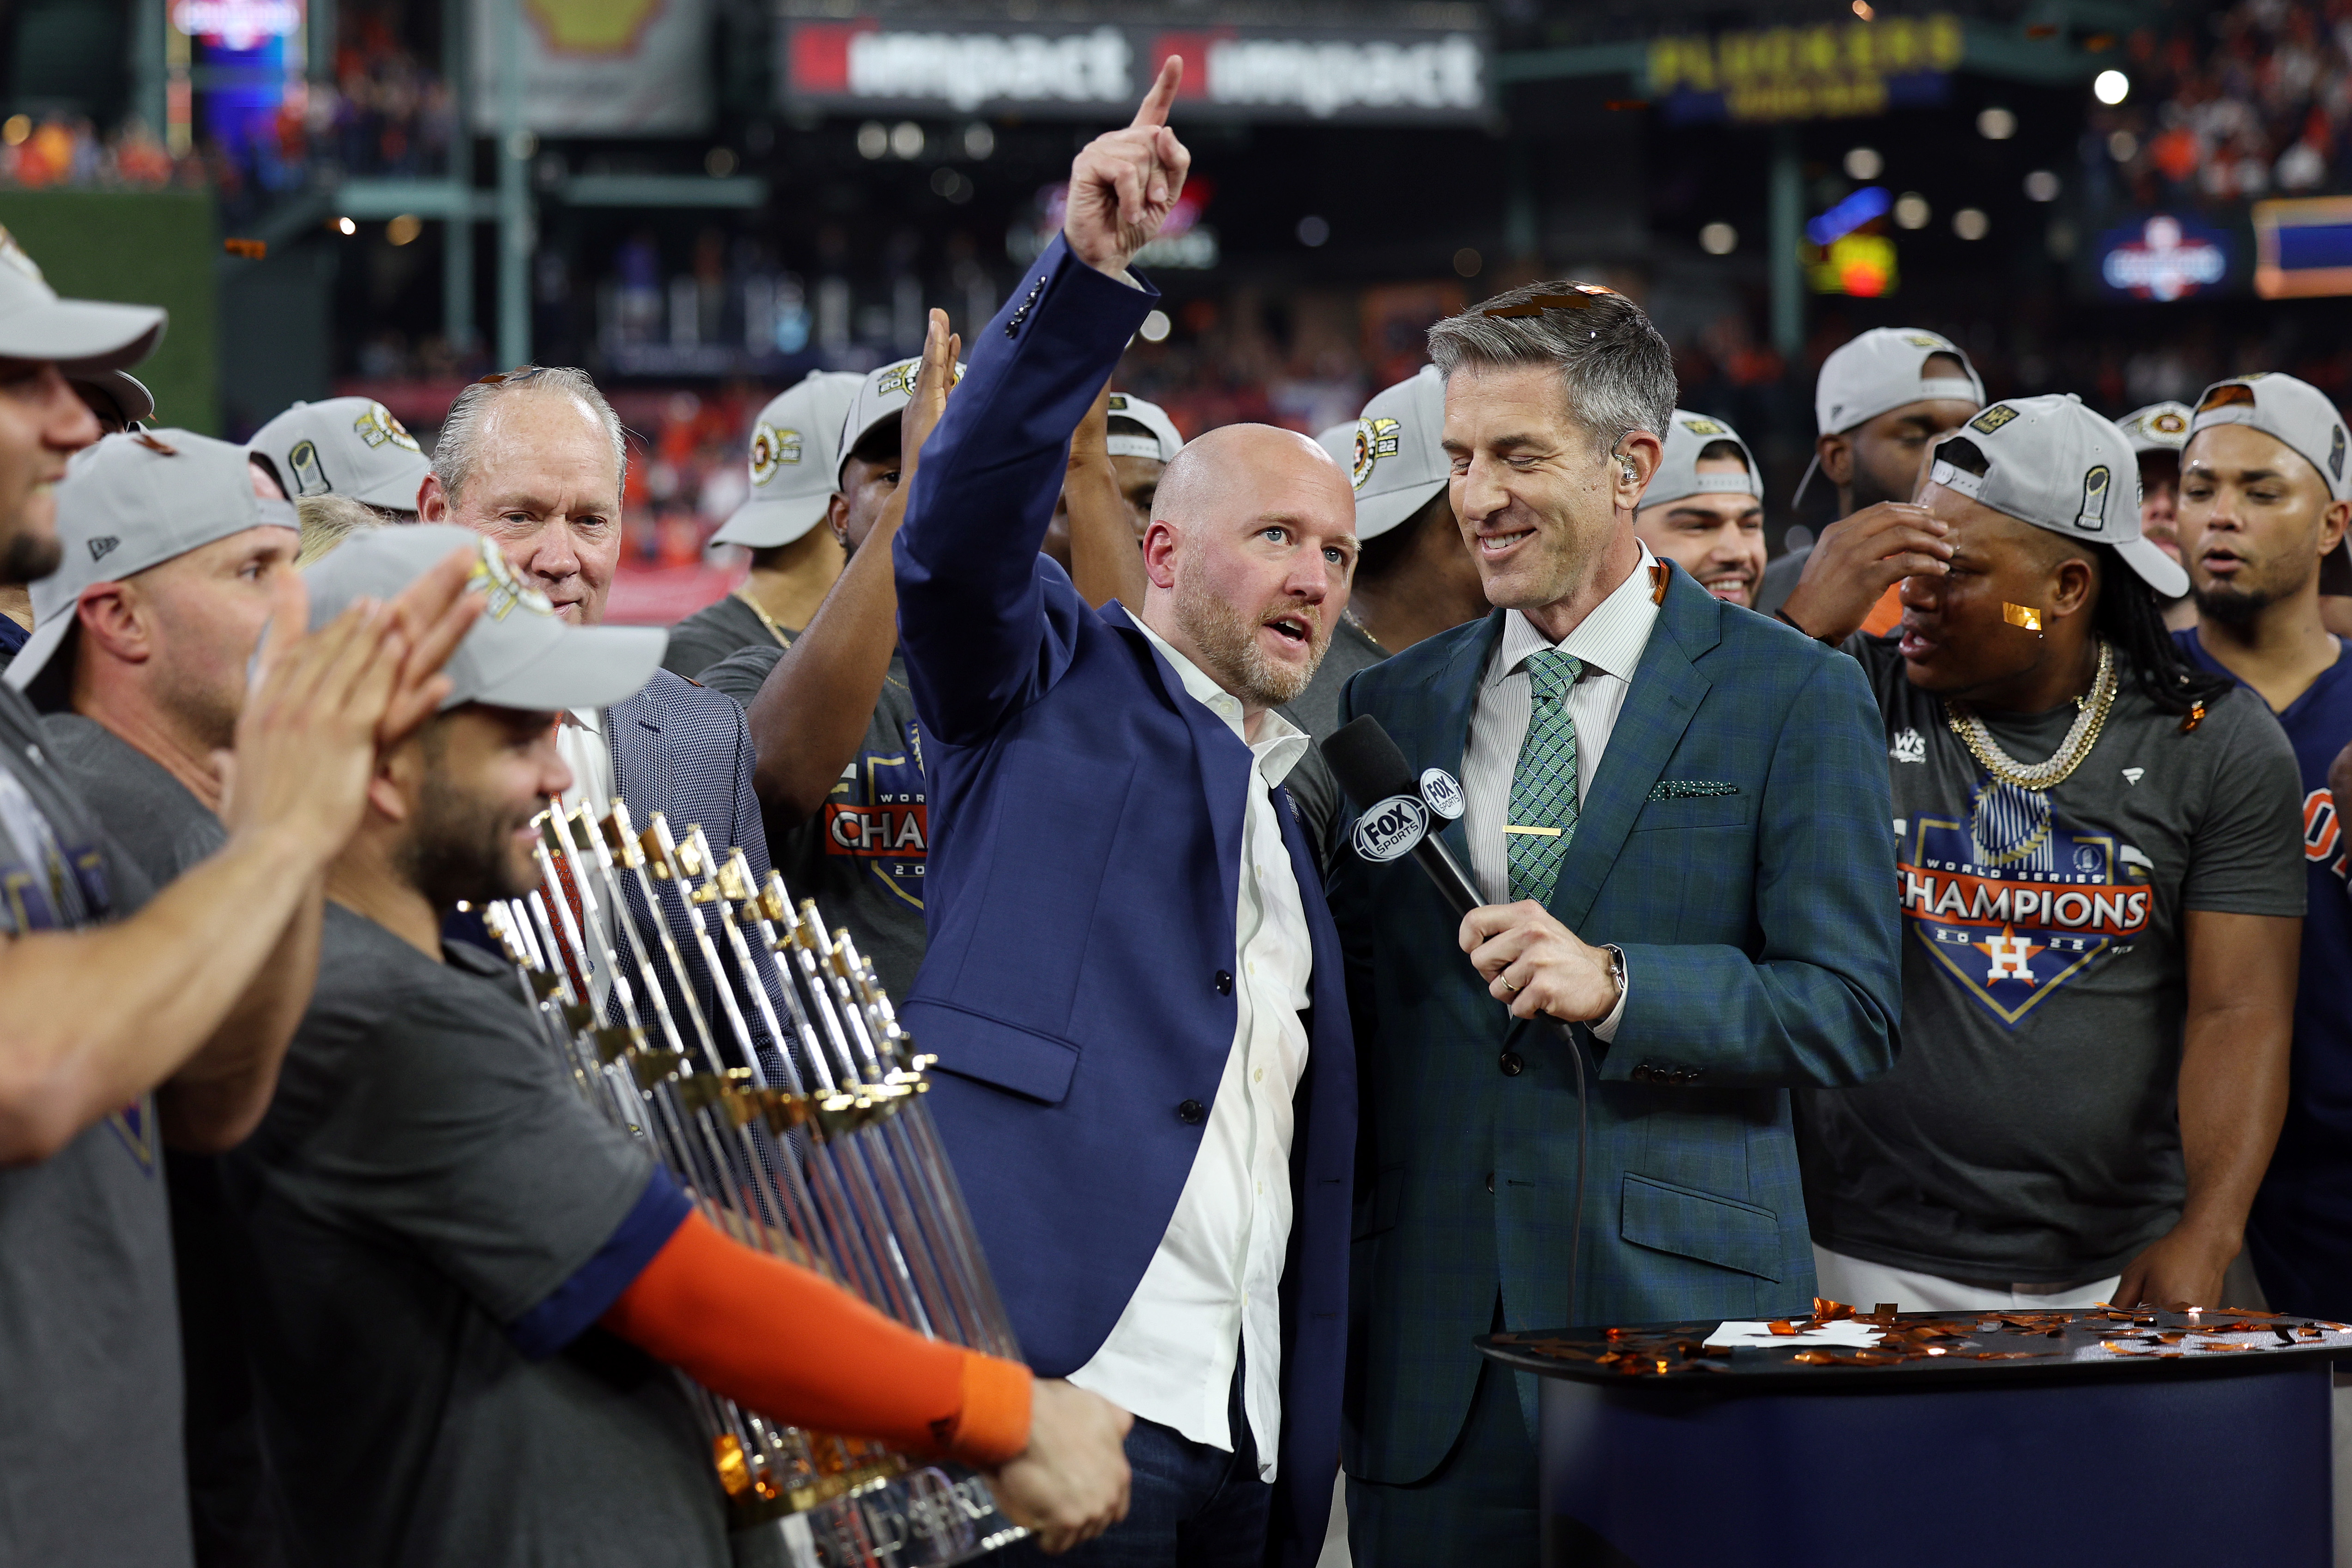 James Click (L), general manager of the Houston Astros, talks to Fox broadcaster Kevin Burkhardt after the team's 4-1 win over the Philadelphia Phillies in Game 6 of the MLB World Series at Minute Maid Park in Houston, Texas, November 5, 2022. /CFP